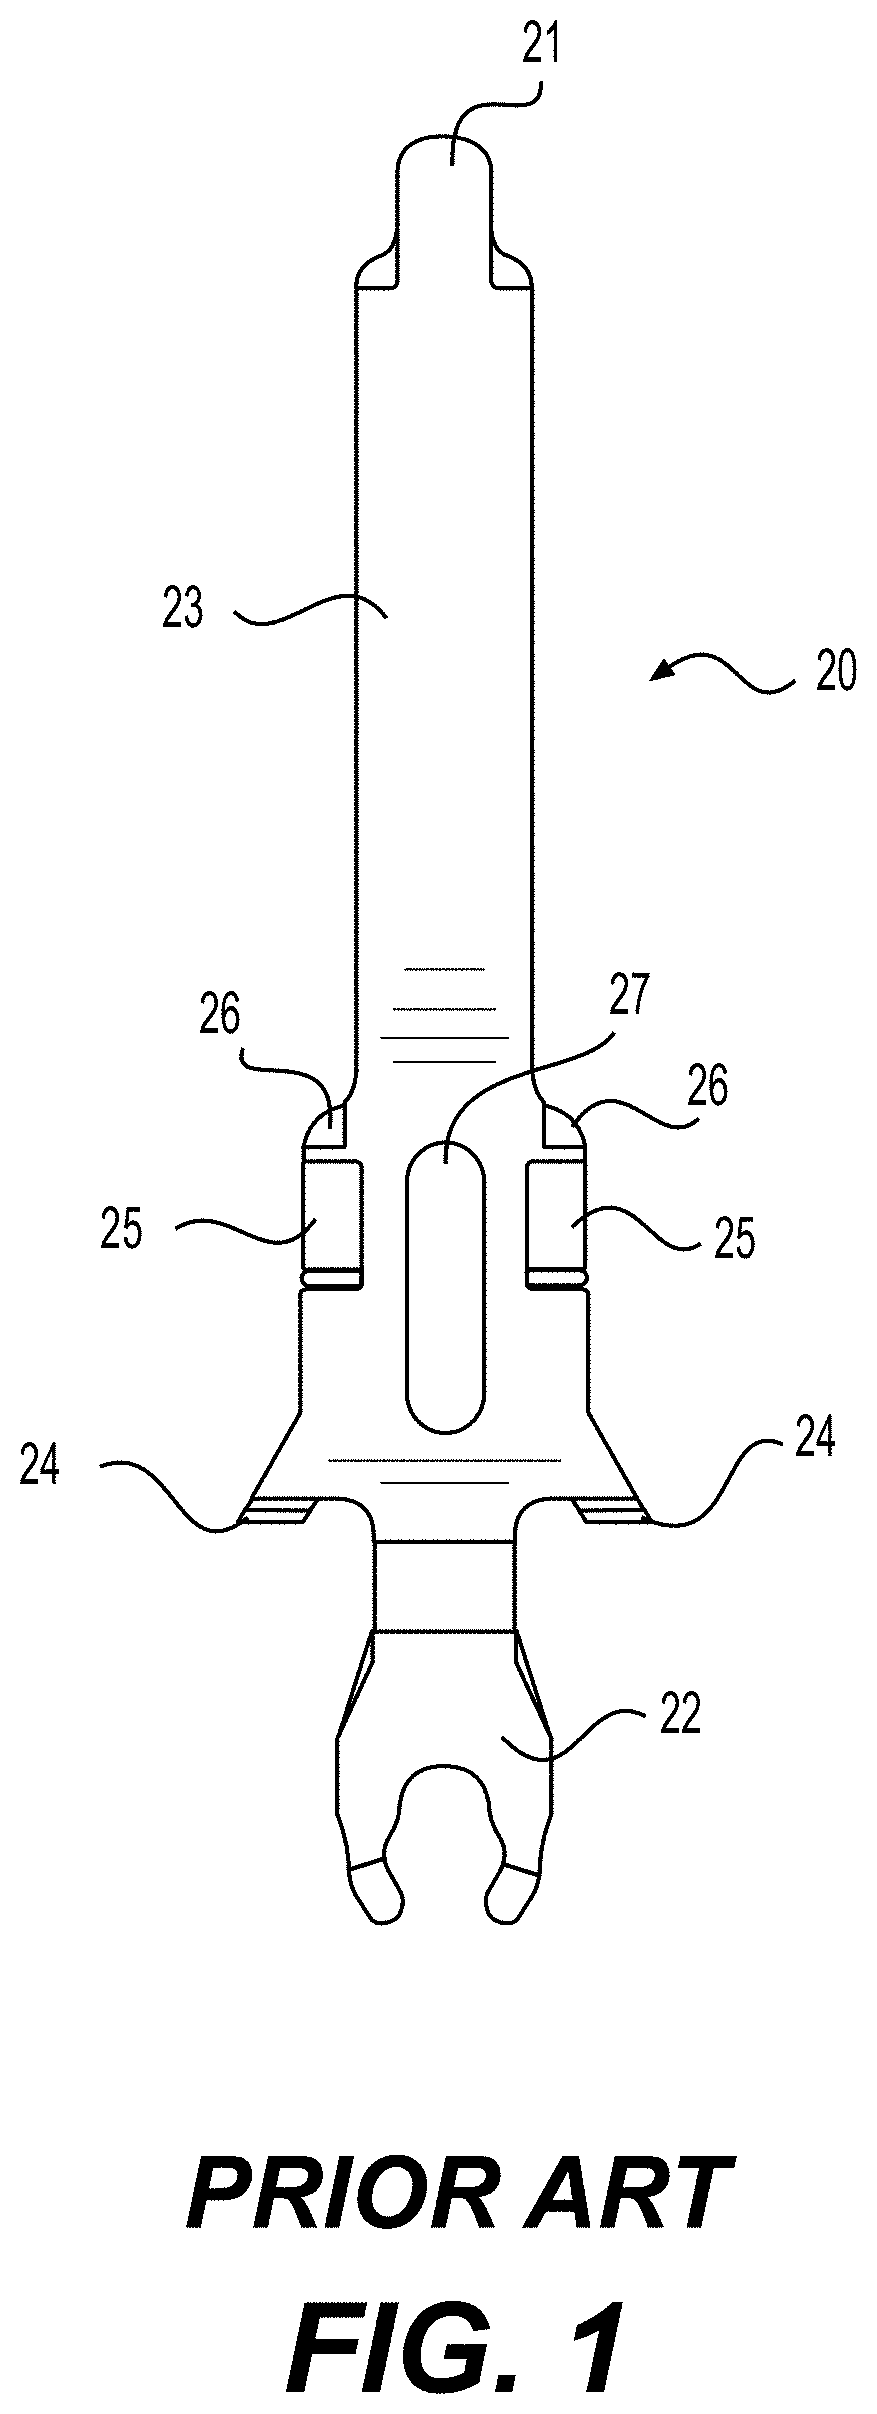 Connector with top- and bottom-stitched contacts